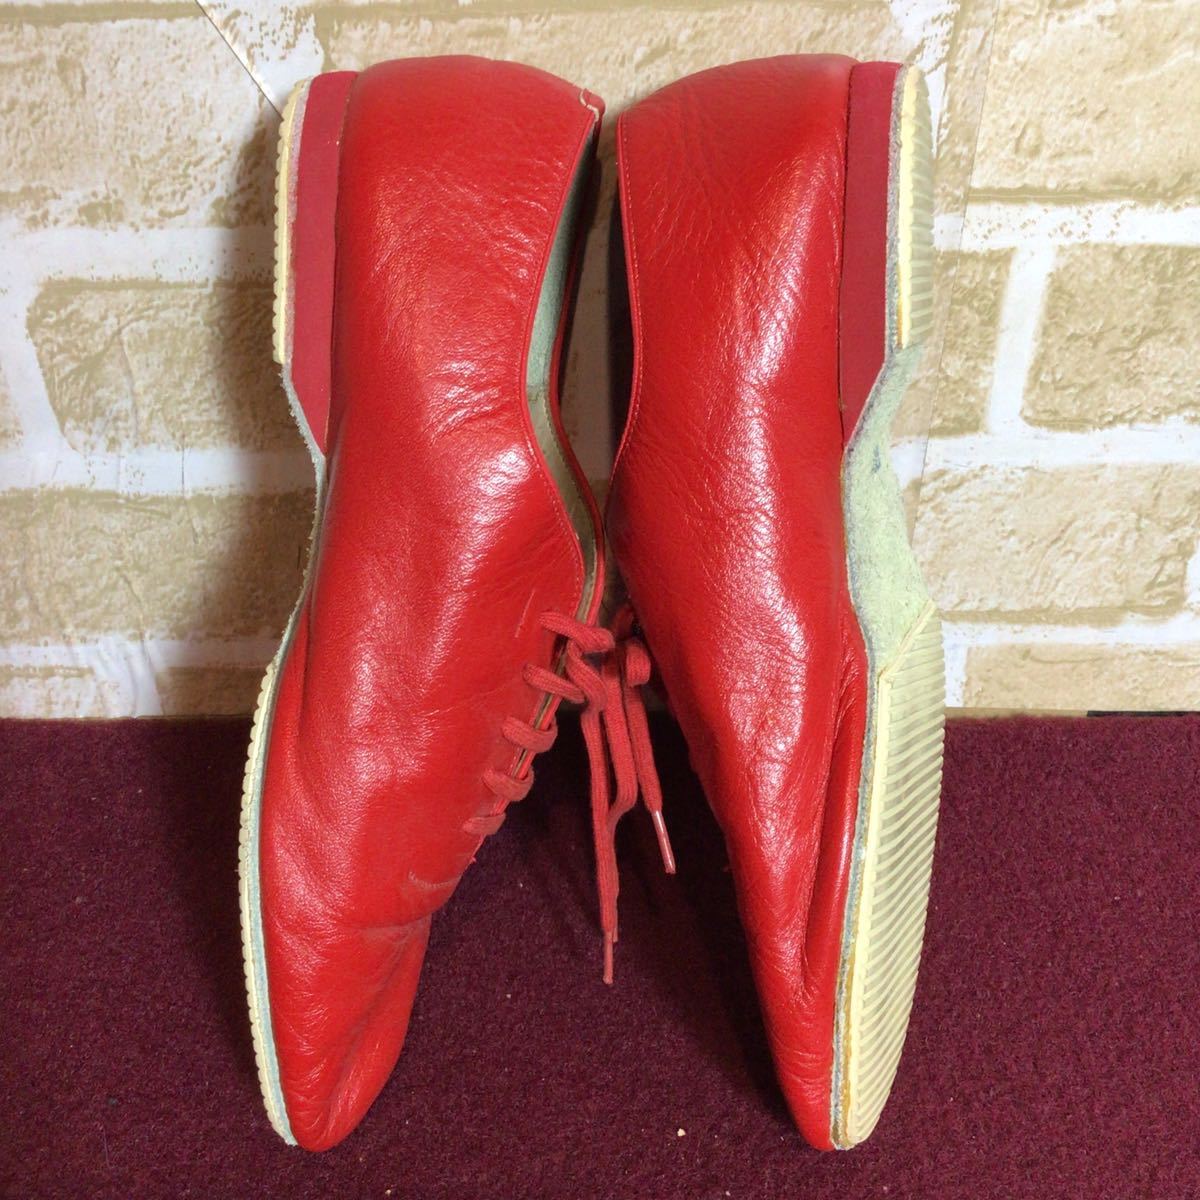 [ selling out! free shipping!]A-199 Chacott! Dance shoes! red!25.0cm! Jazz! Dan sa-! tea cot! hobby! work! change for also! used!